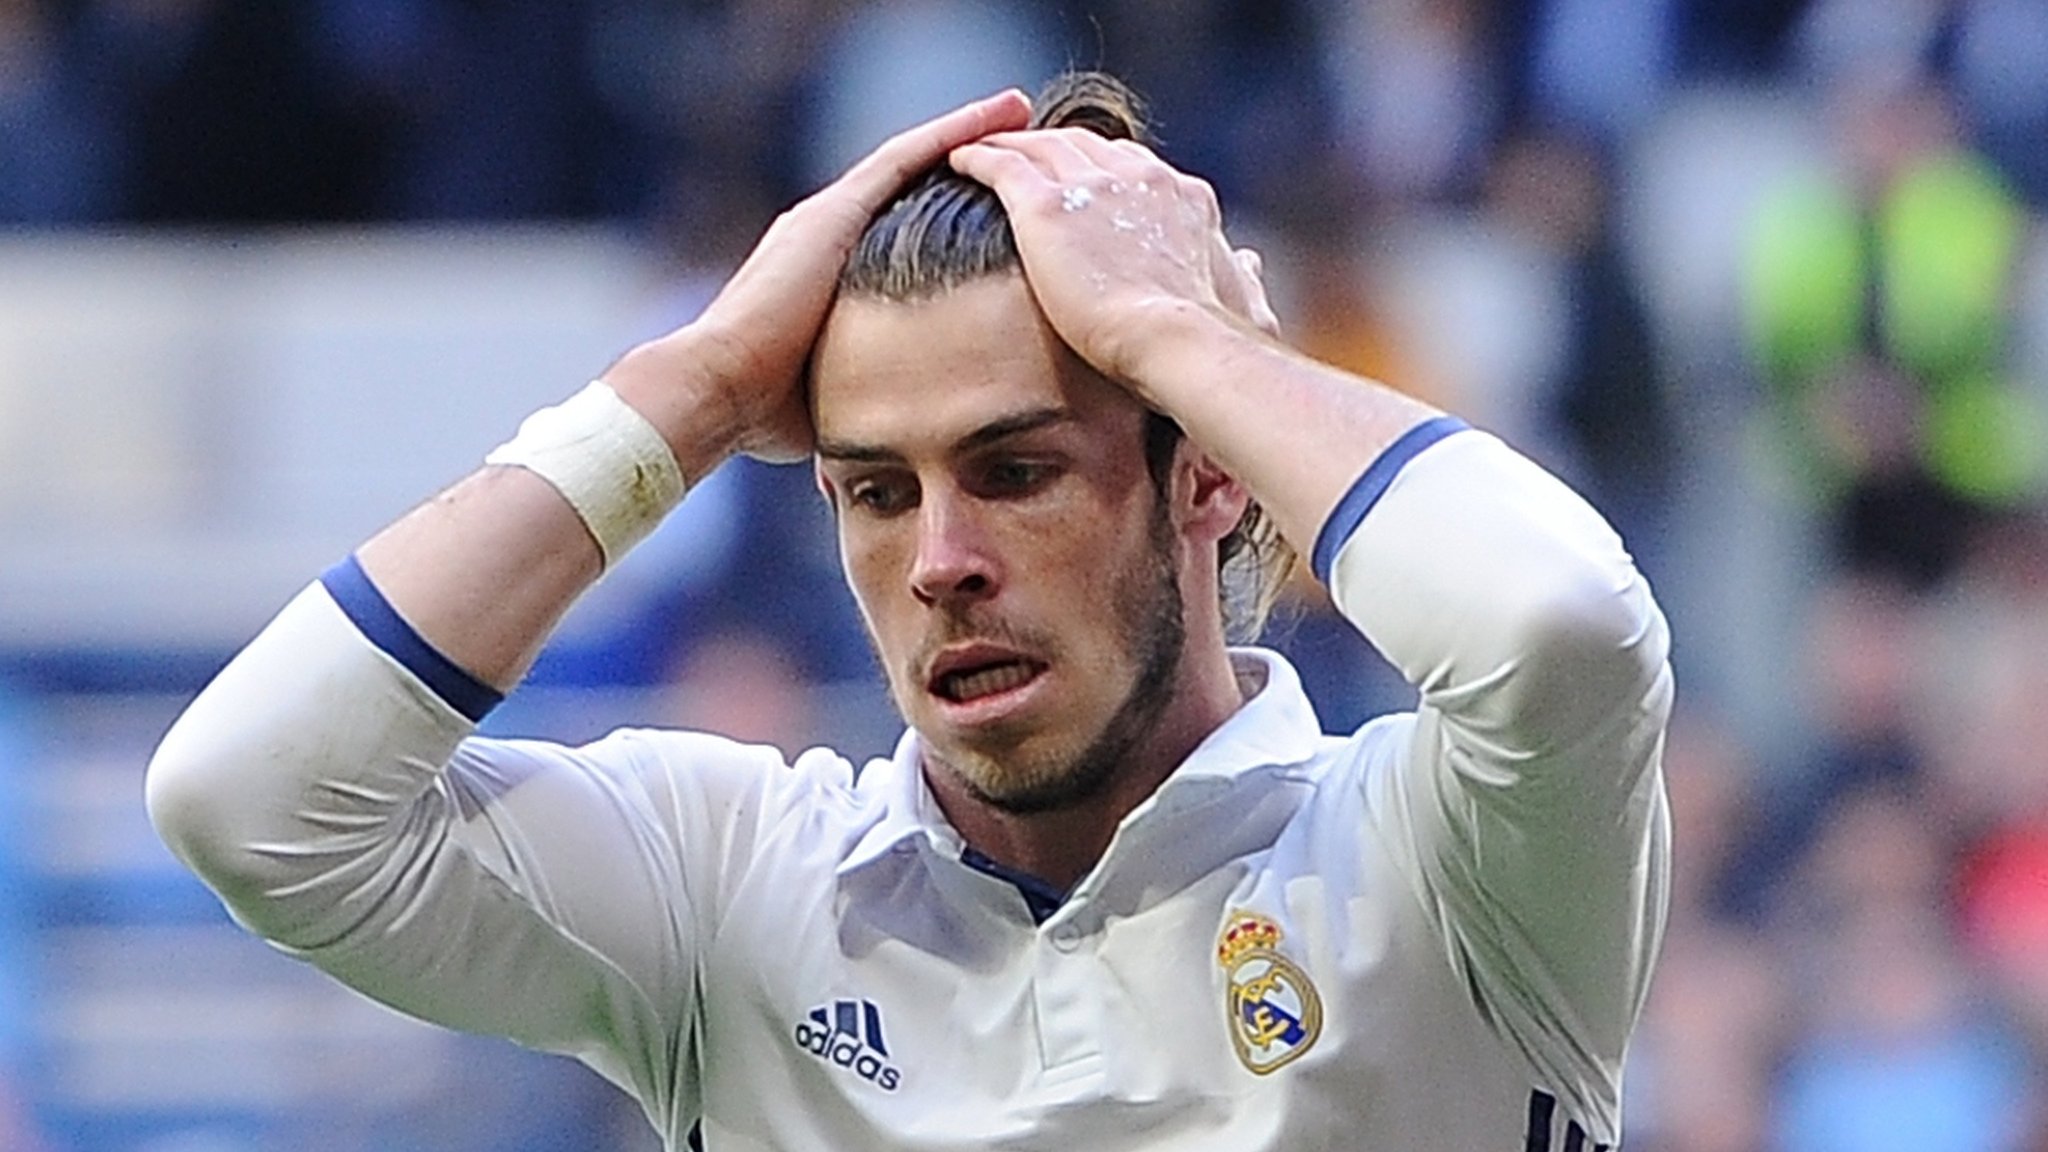 Gossip: Real Madrid to sell Bale next summer